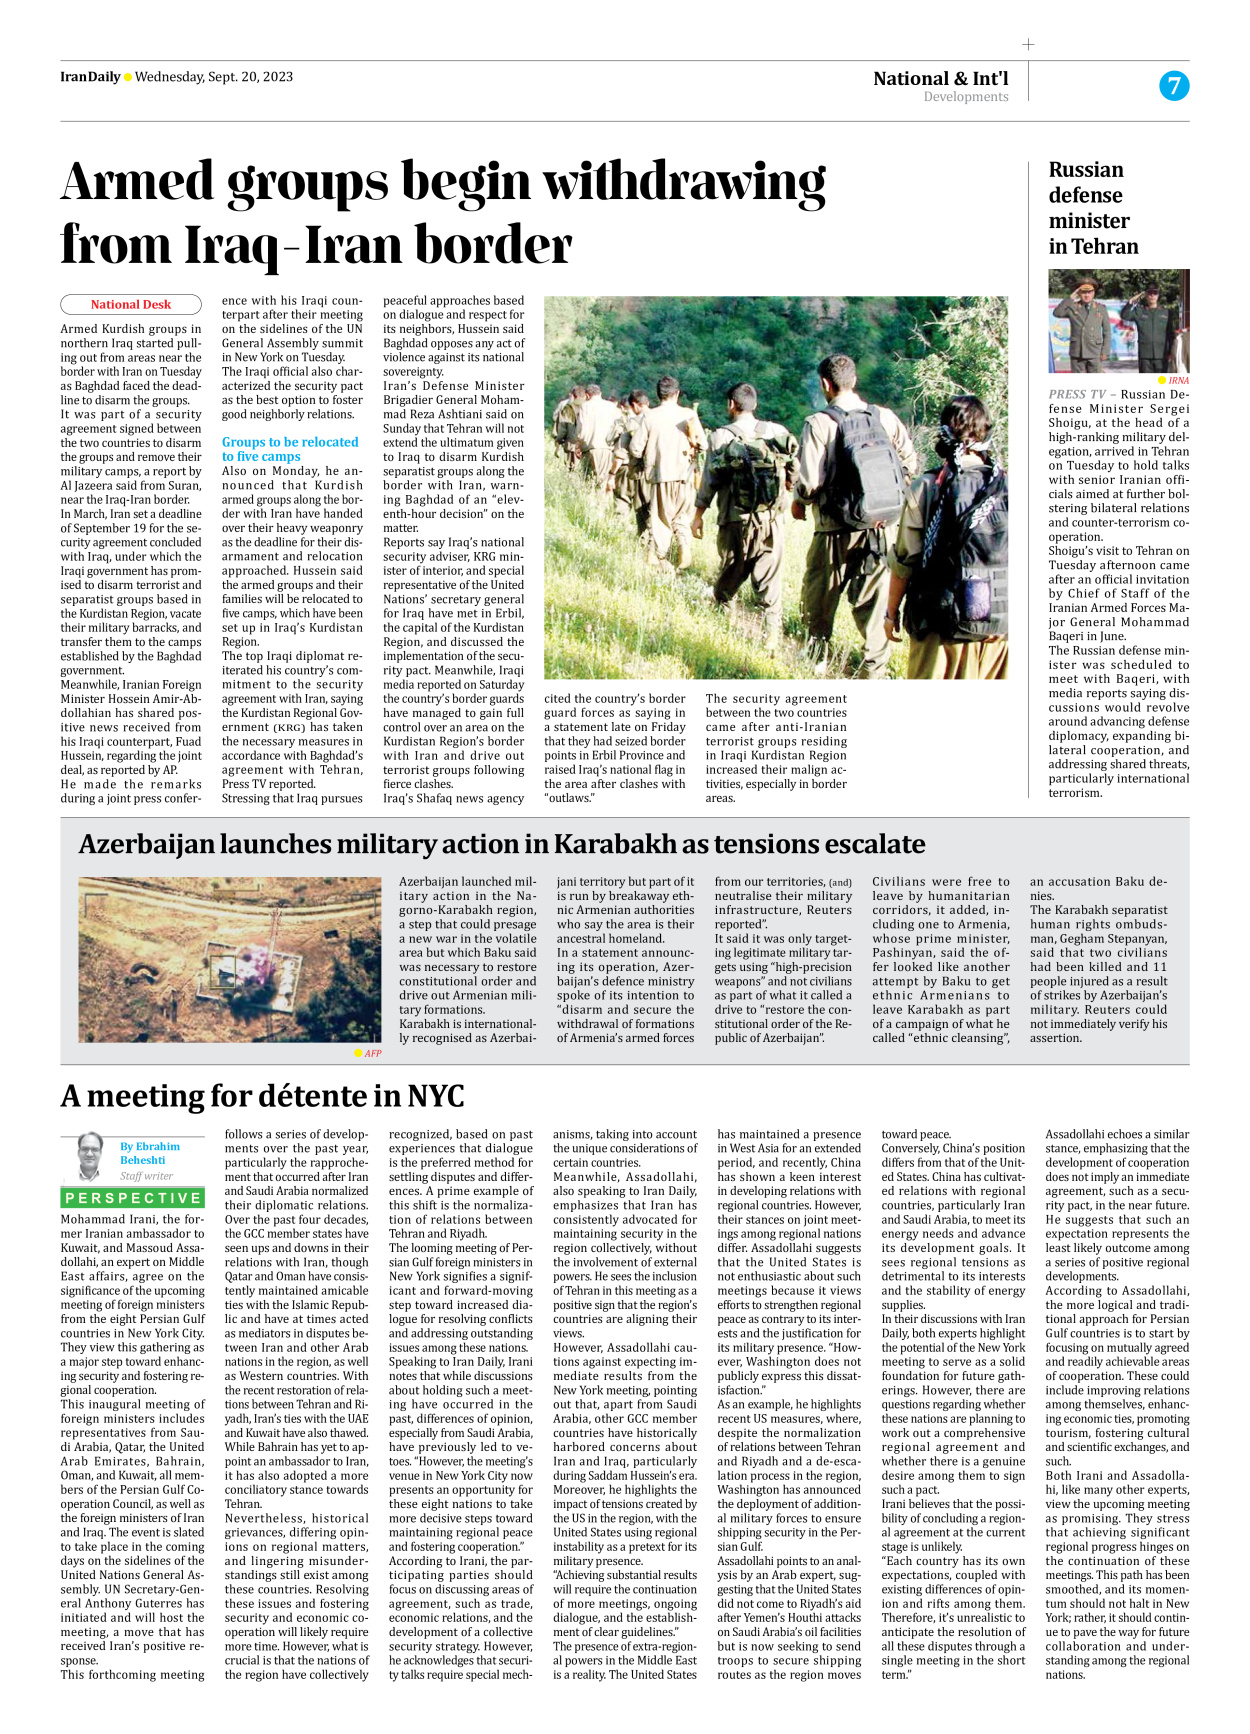 Iran Daily - Number Seven Thousand Three Hundred and Ninety - 20 September 2023 - Page 7